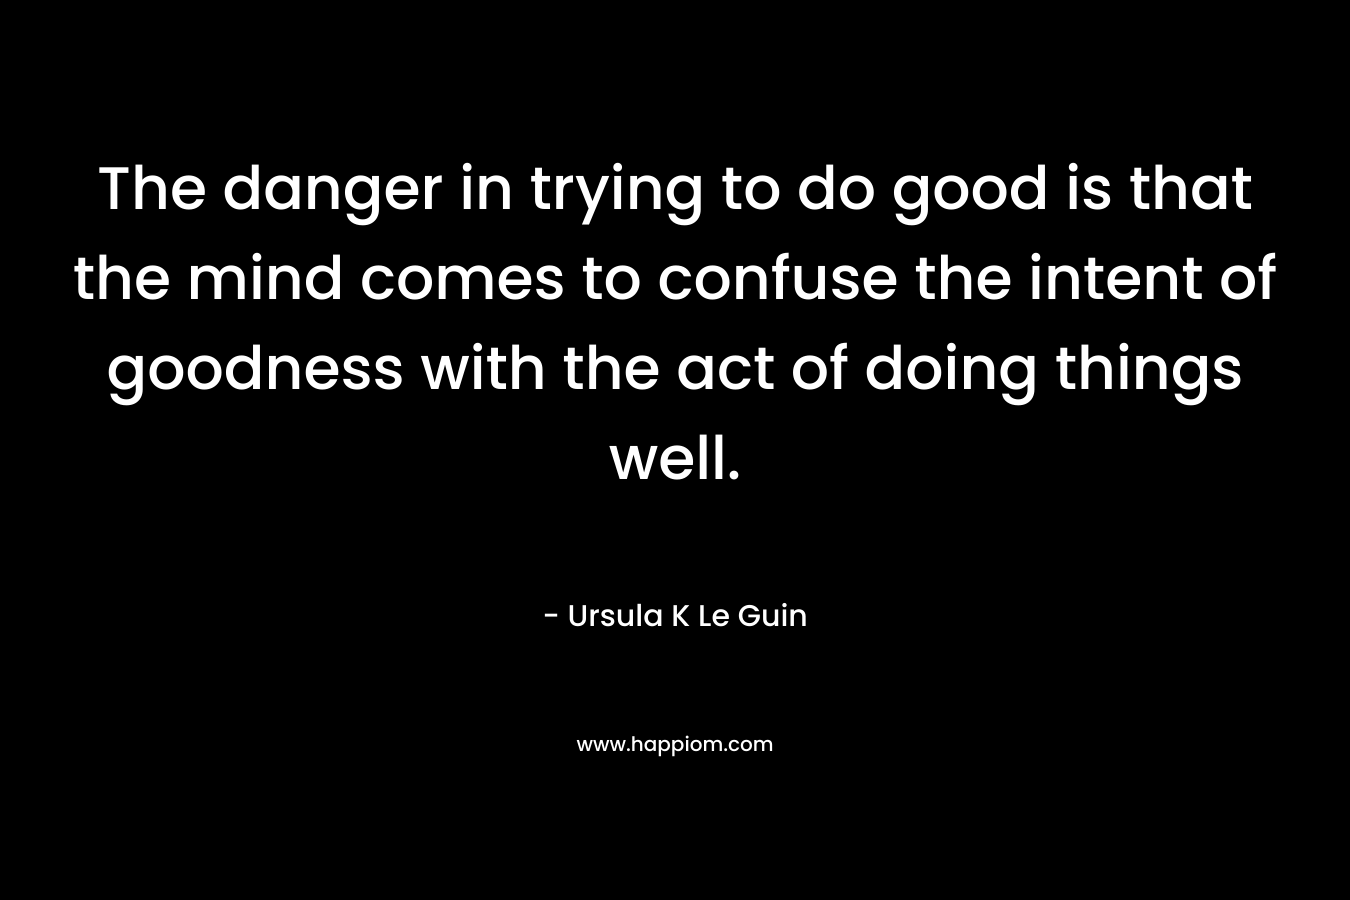 The danger in trying to do good is that the mind comes to confuse the intent of goodness with the act of doing things well. – Ursula K Le Guin